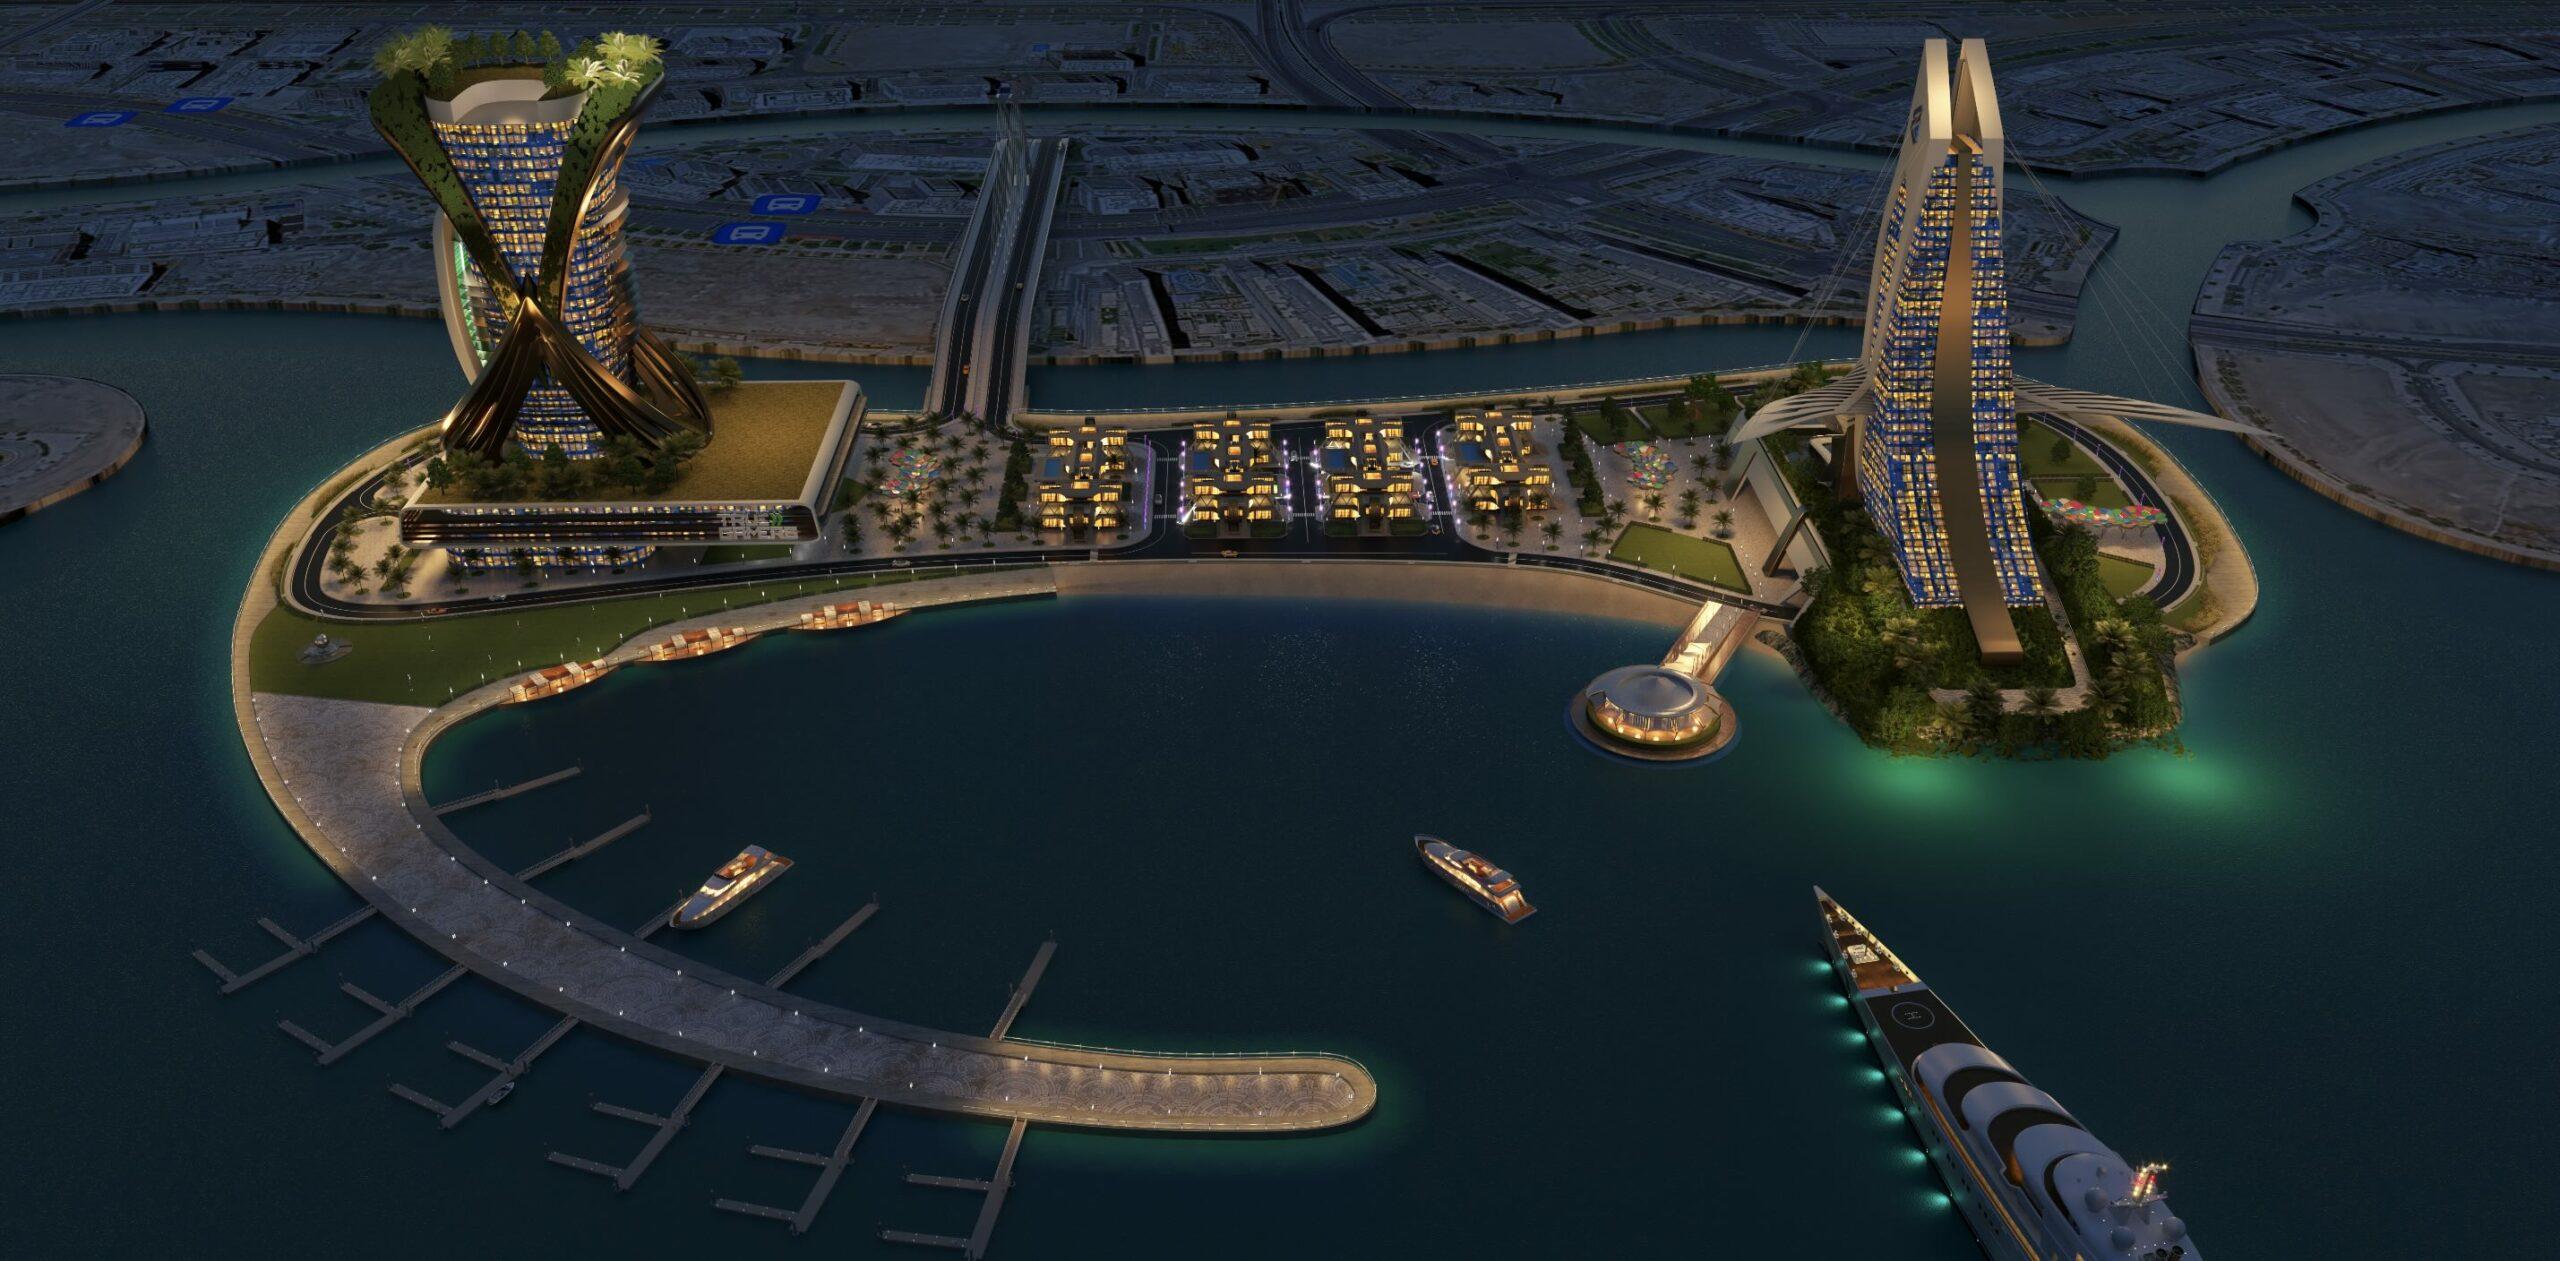 Abu Dhabi could soon be home to the world’s first eSports island